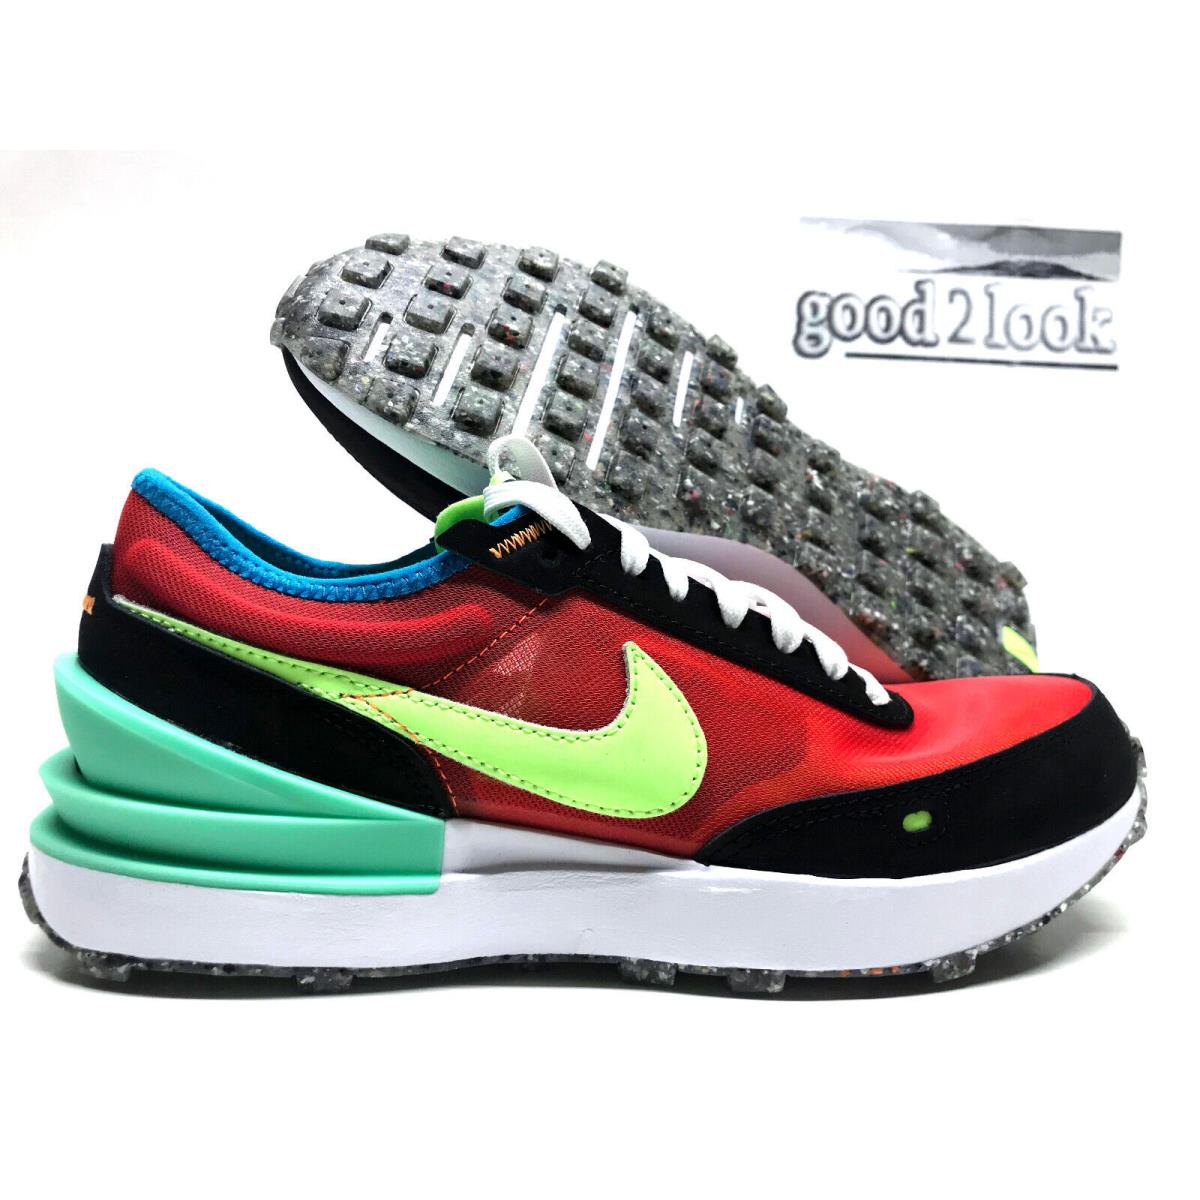 Nike Waffle One GS Exeter Edition Comet Red/green Size 5.5Y/WOMEN 7 DM8116-600